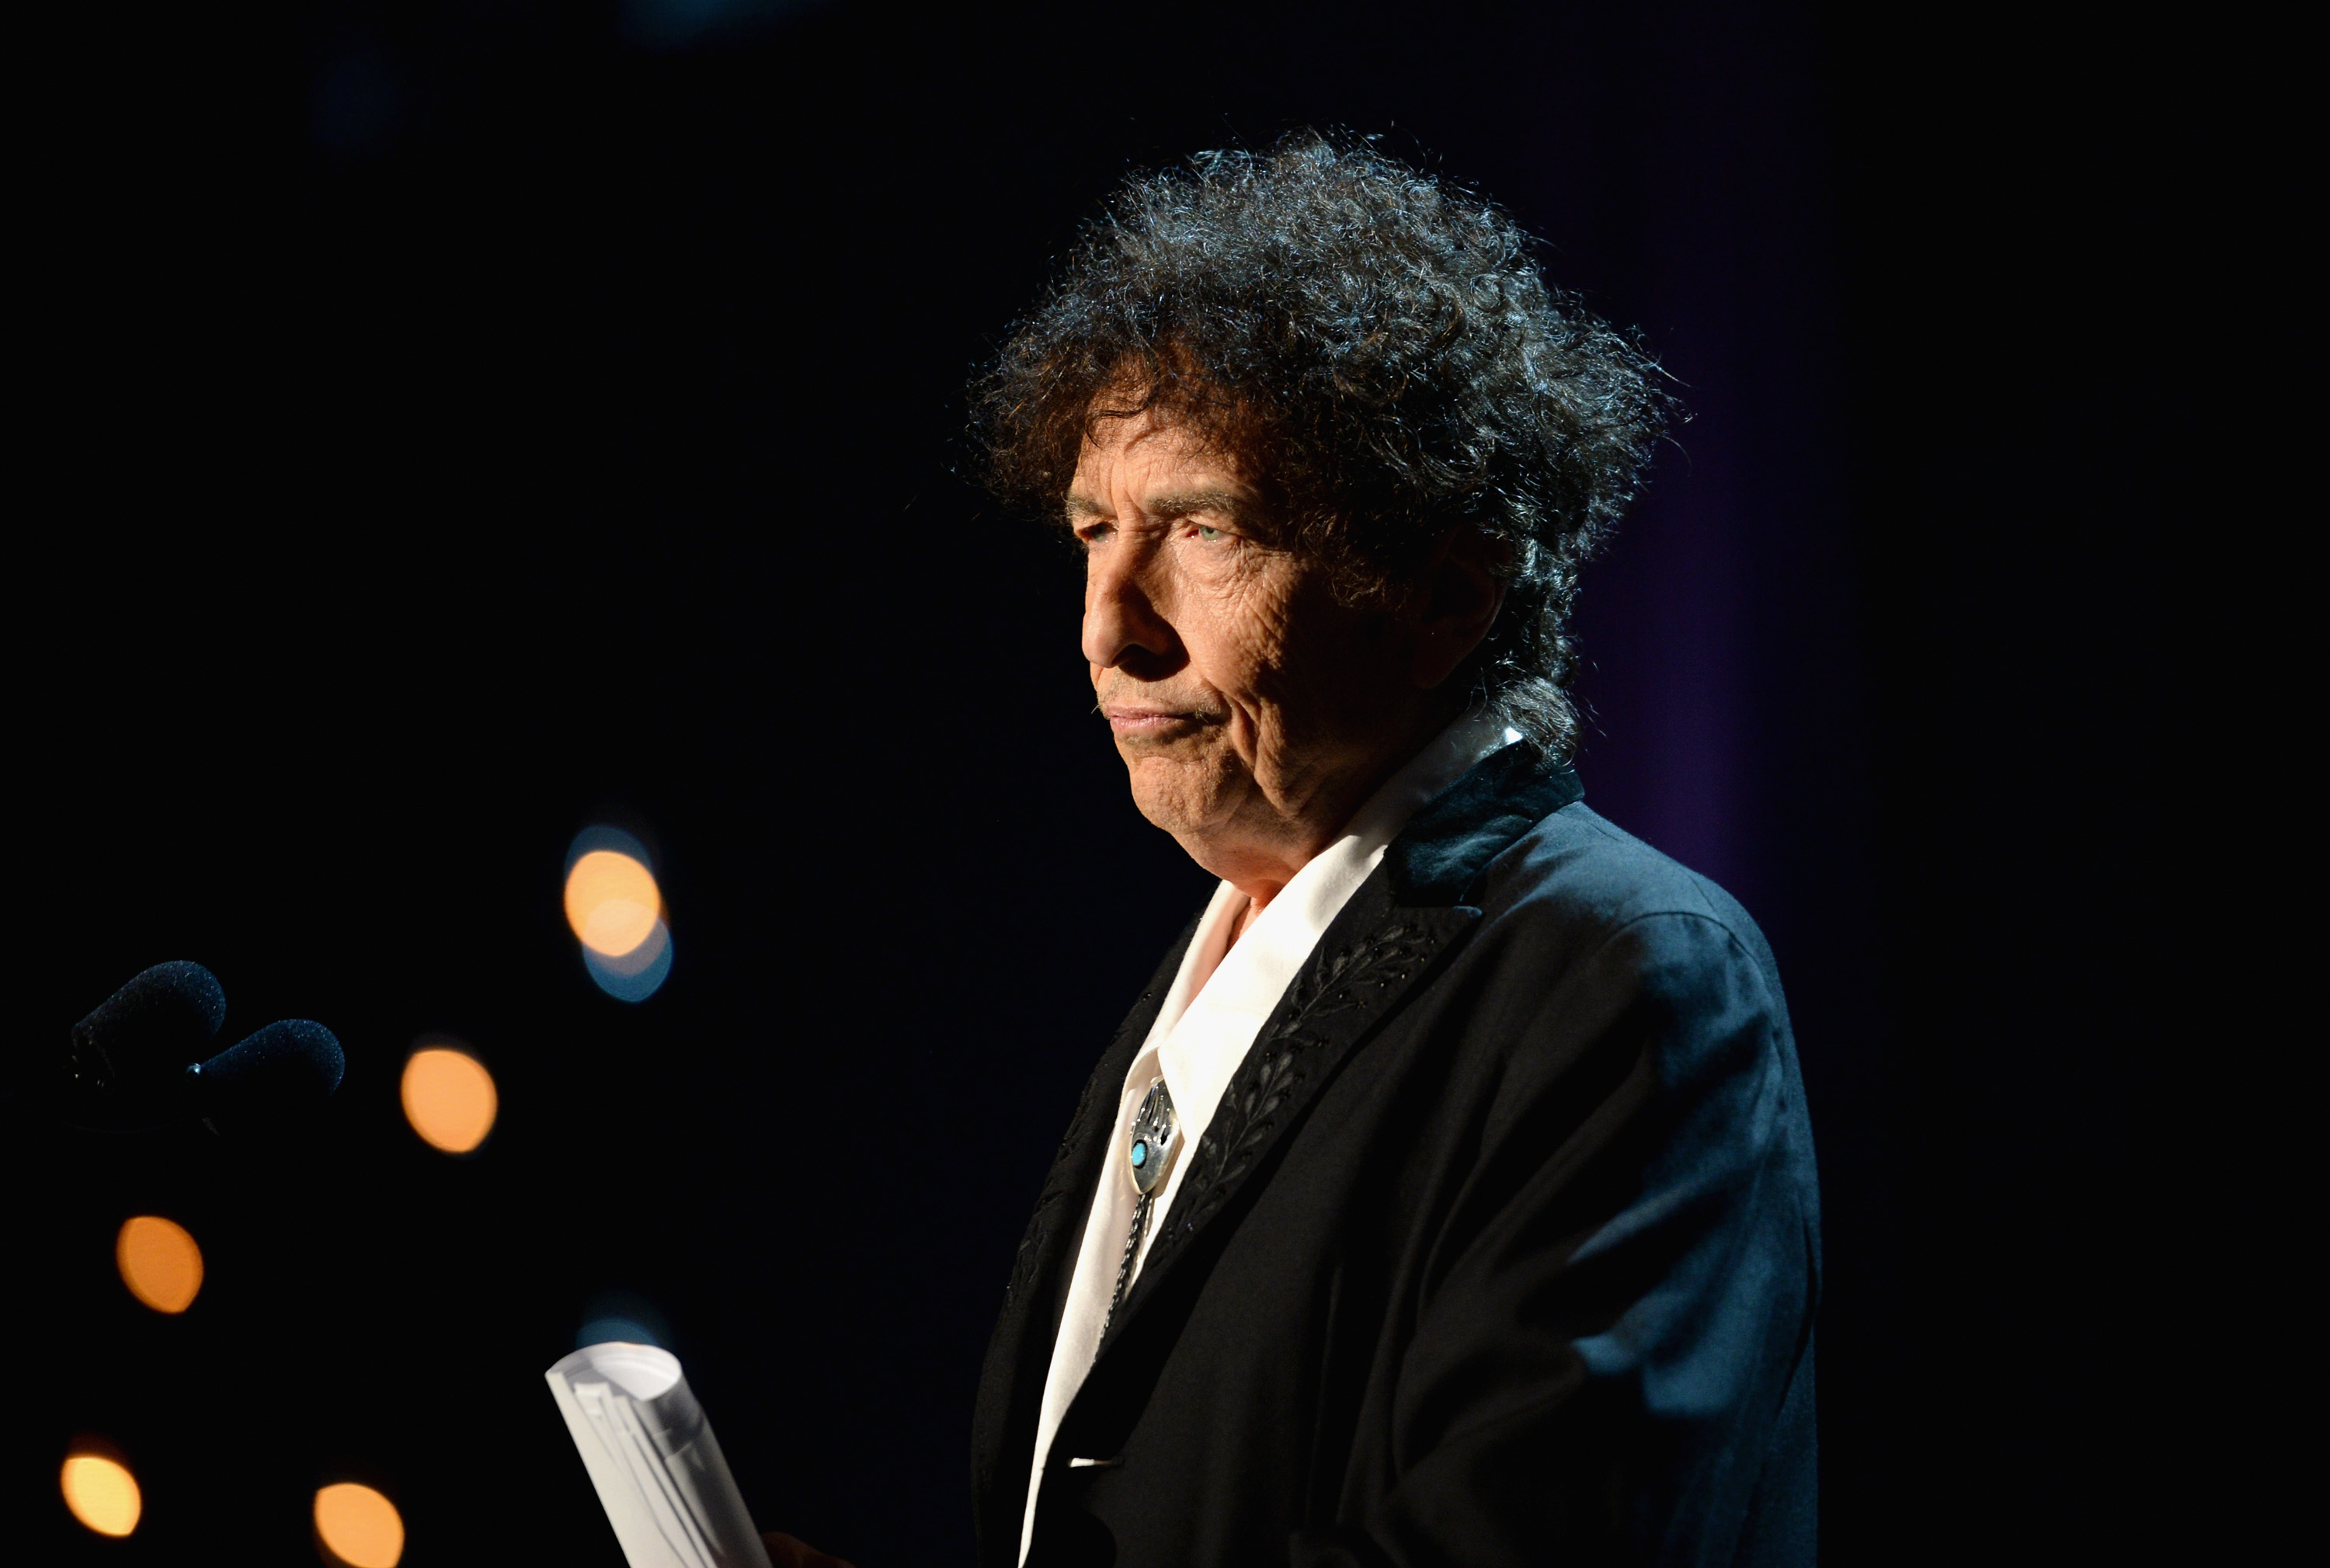 Honoree Bob Dylan speaks onstage at the 25th anniversary MusiCares 2015 Person Of The Year Gala honoring Bob Dylan at the Los Angeles Convention Center on February 6, 2015 in Los Angeles, California. Michael Kovac&mdash;WireImage (Michael Kovac&mdash;WireImage)